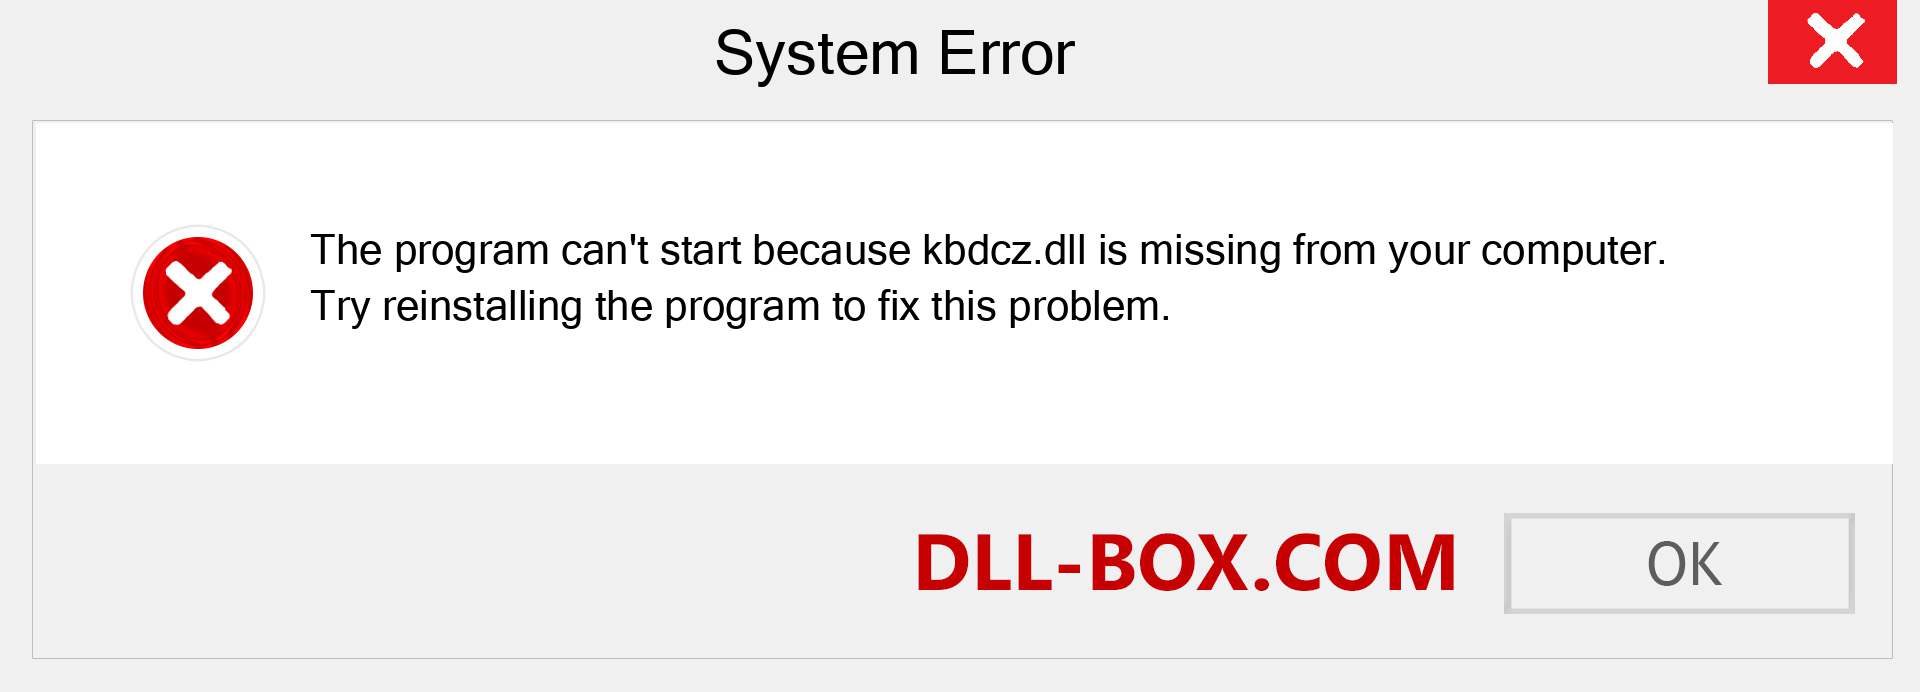  kbdcz.dll file is missing?. Download for Windows 7, 8, 10 - Fix  kbdcz dll Missing Error on Windows, photos, images